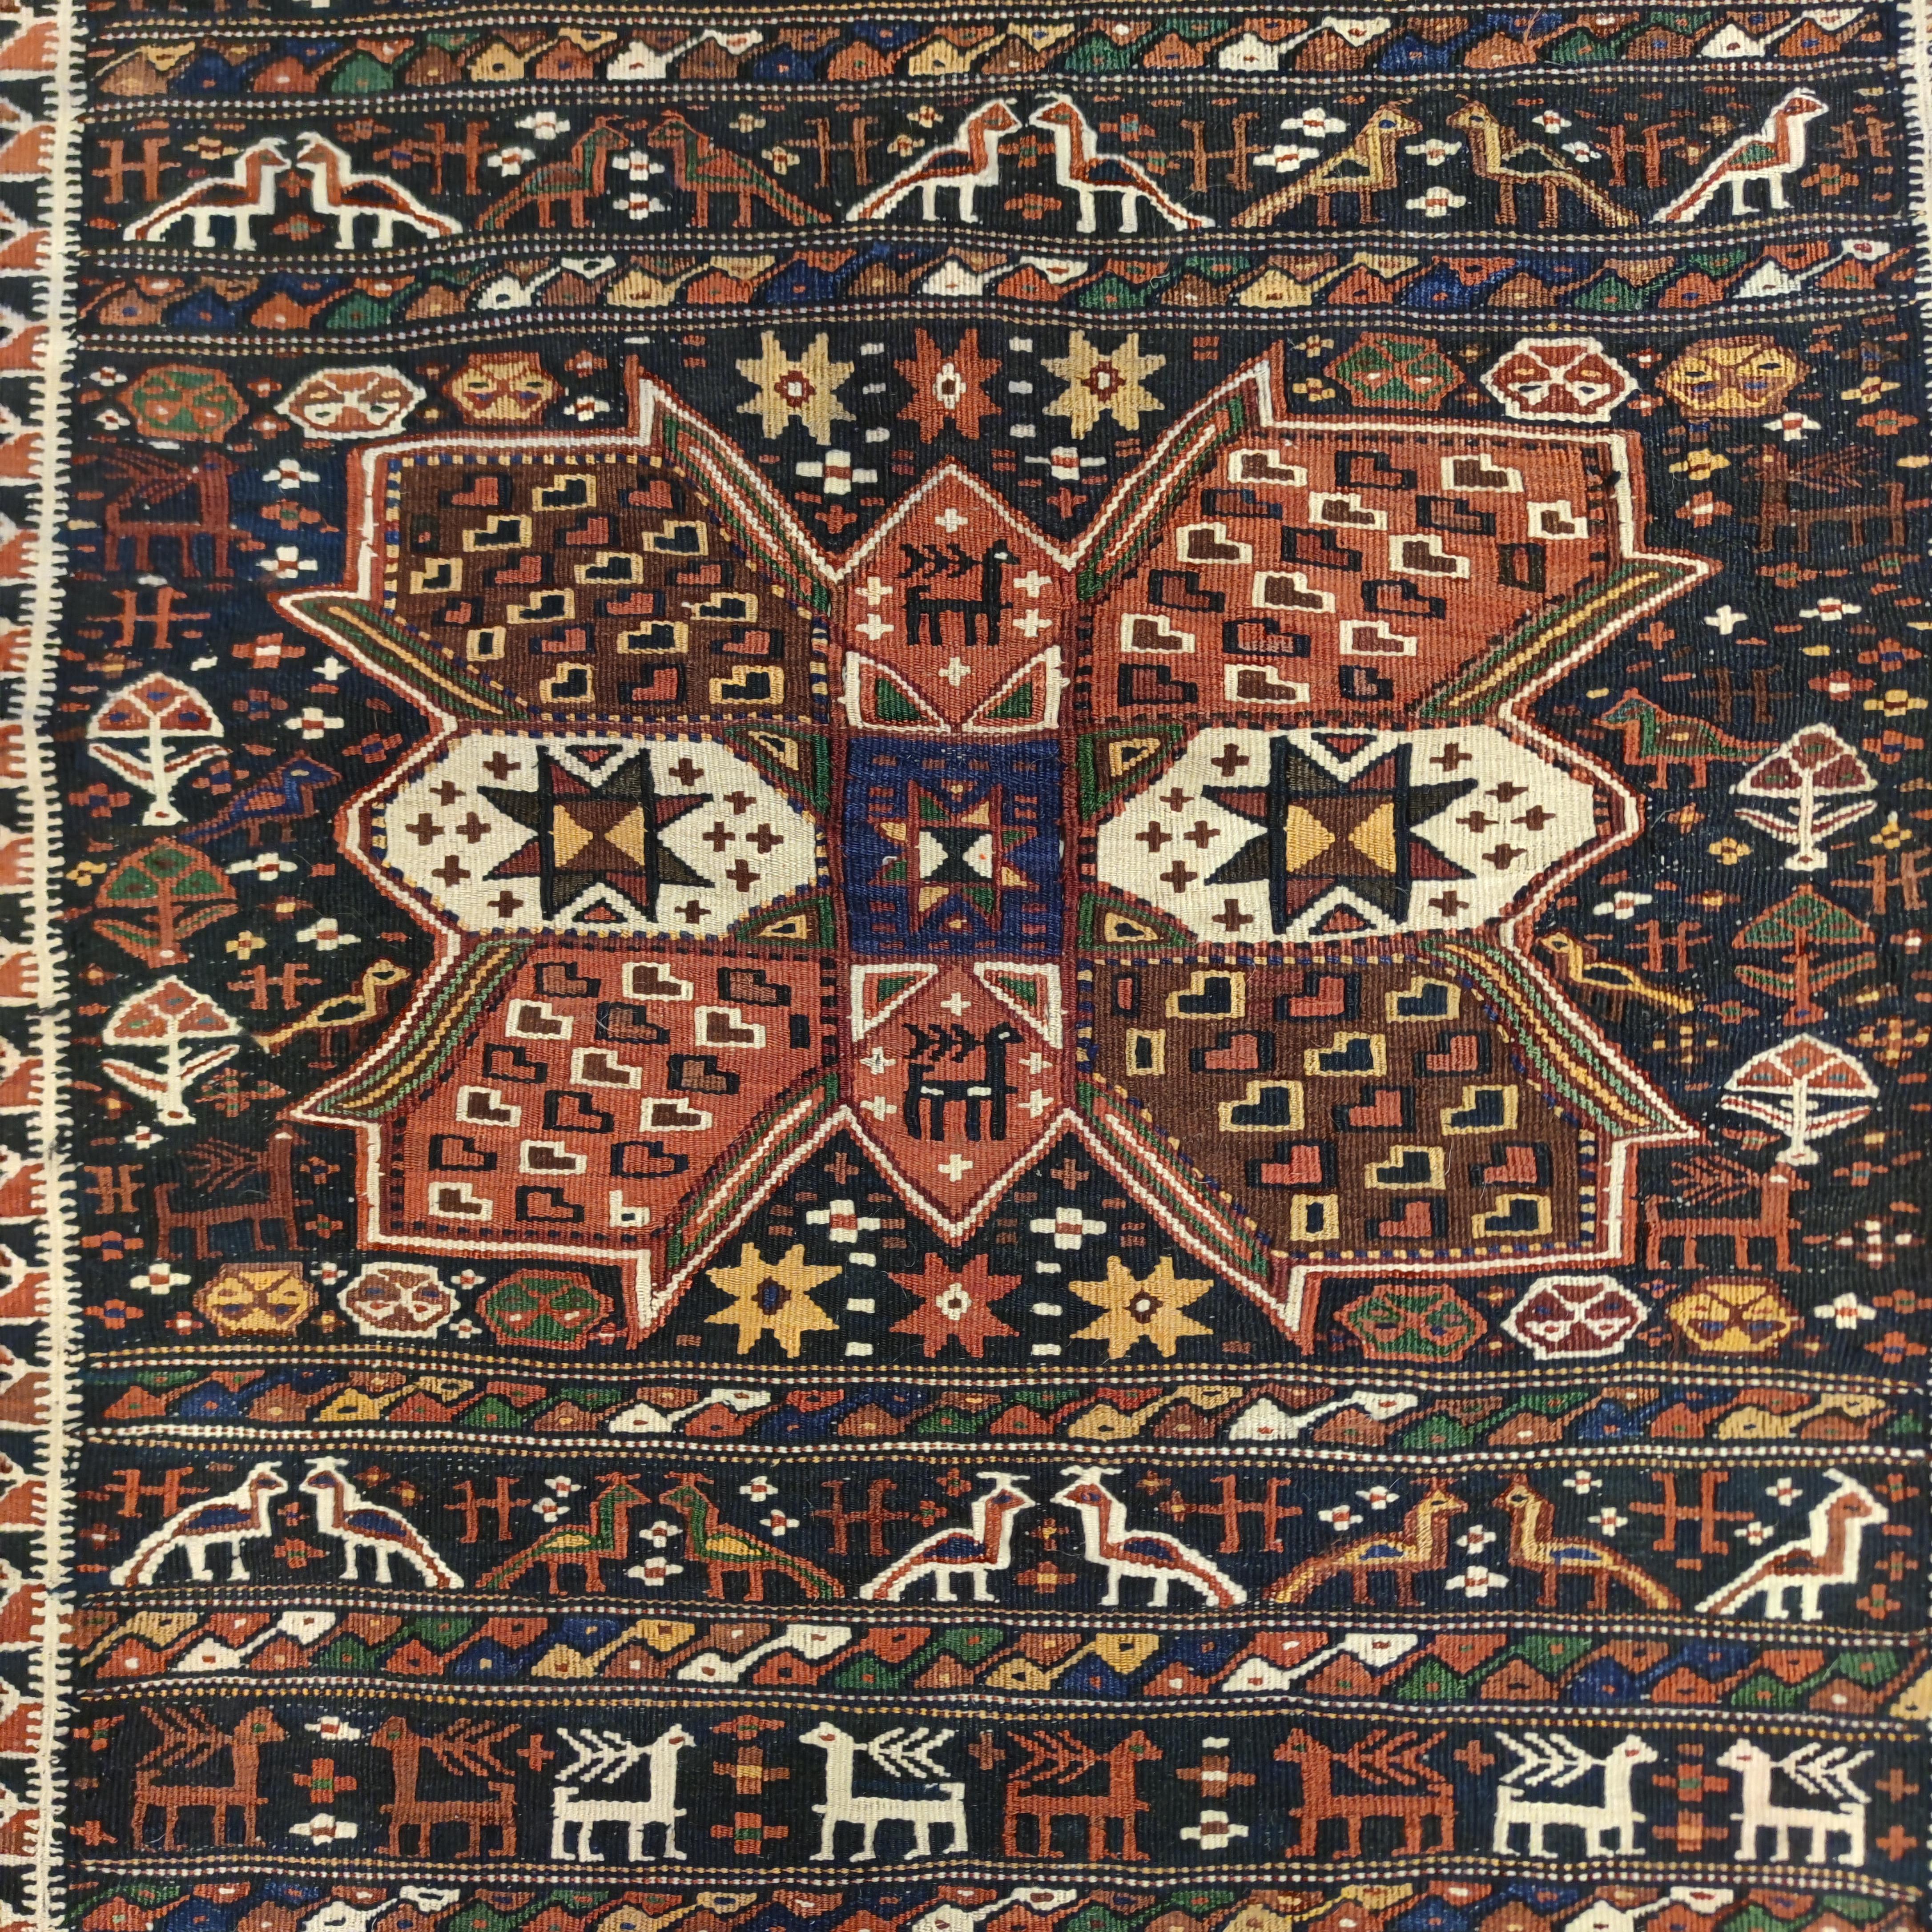 Hand-Woven Rare Small Antique Blue Caucasian Kilim Rug with Rows of Zoomorphic Motifs